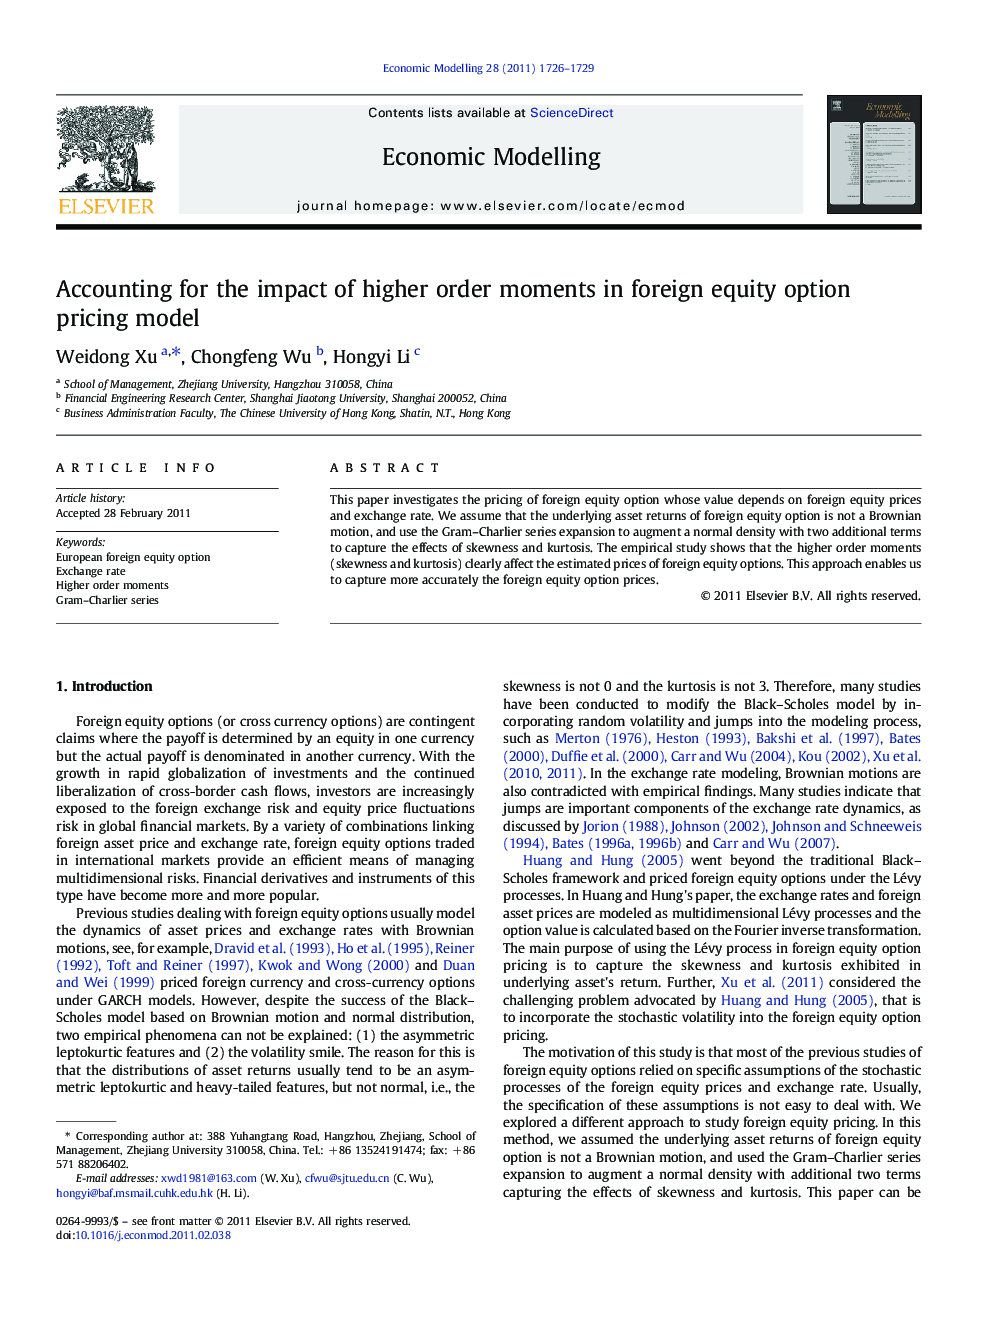 Accounting for the impact of higher order moments in foreign equity option pricing model